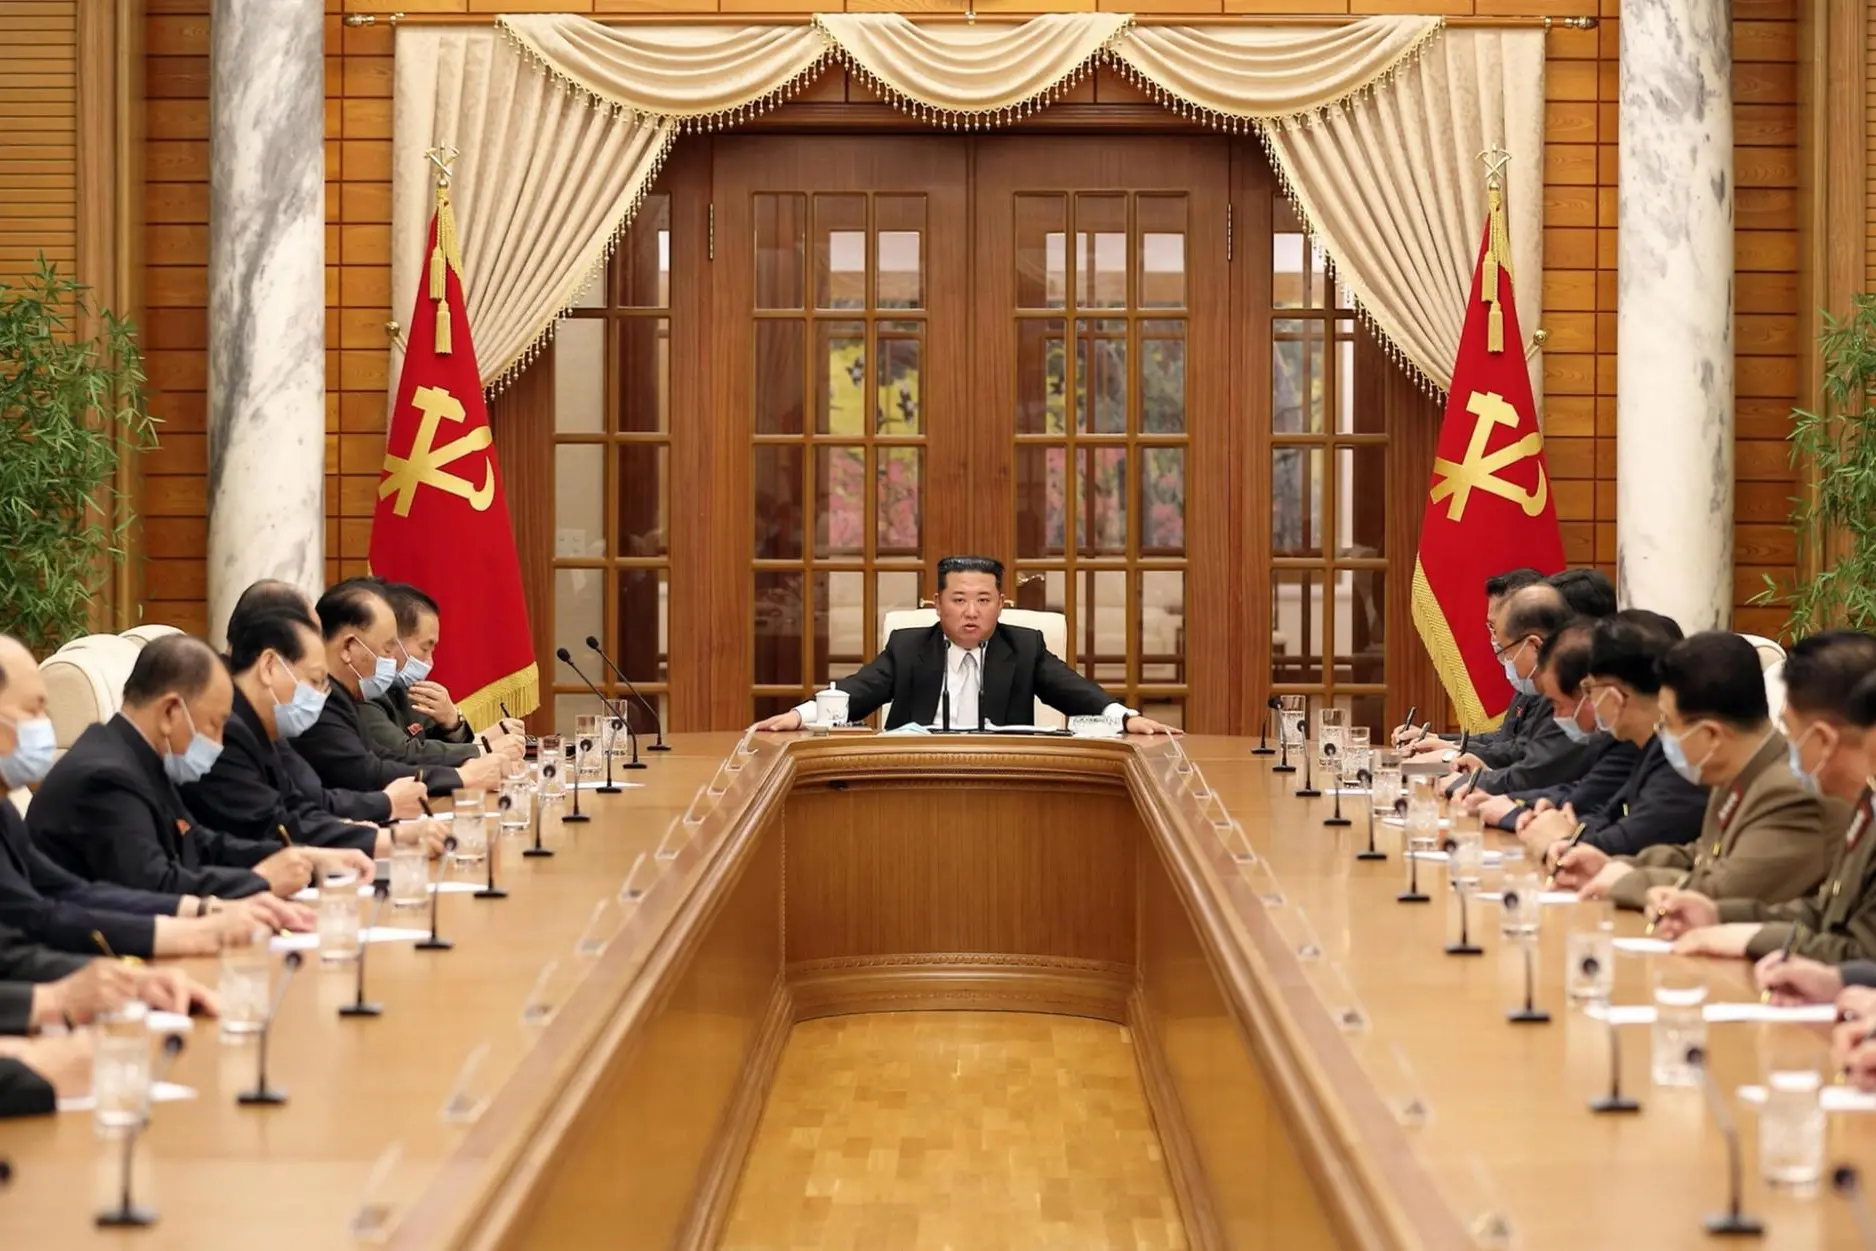 epa09941460 A photo released by the official North Korean Central News Agency (KCNA) shows the meeting of the 8th Political Bureau of 8th Central Committee of the WPK, convened at the office building of the Party Central Committee in Pyongyang, North Korea, 12 May 2022. Kim Jong-un (C), general secretary of the Workers' Party of Korea (WPK), presented at the meeting, held to organize the government's response to an outbreak of COVID-19 in Pyongyang. EPA/KCNA EDITORIAL USE ONLY